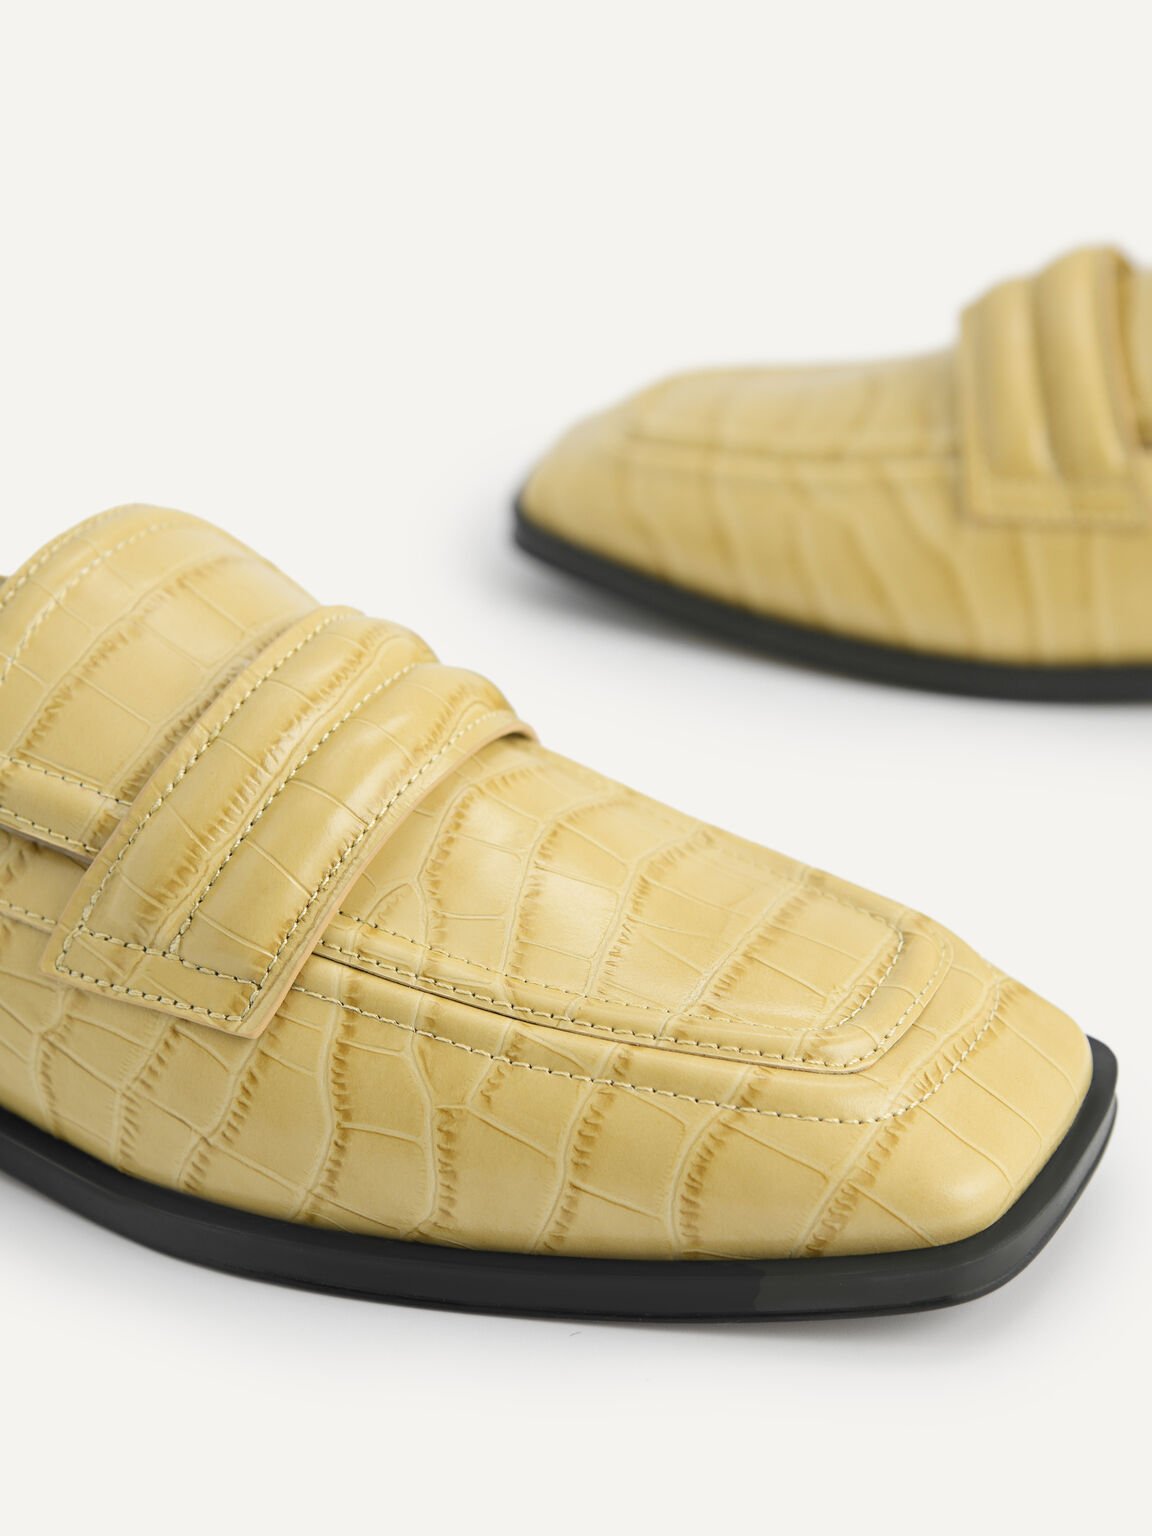 Croc-Effect Leather Loafers, Sand